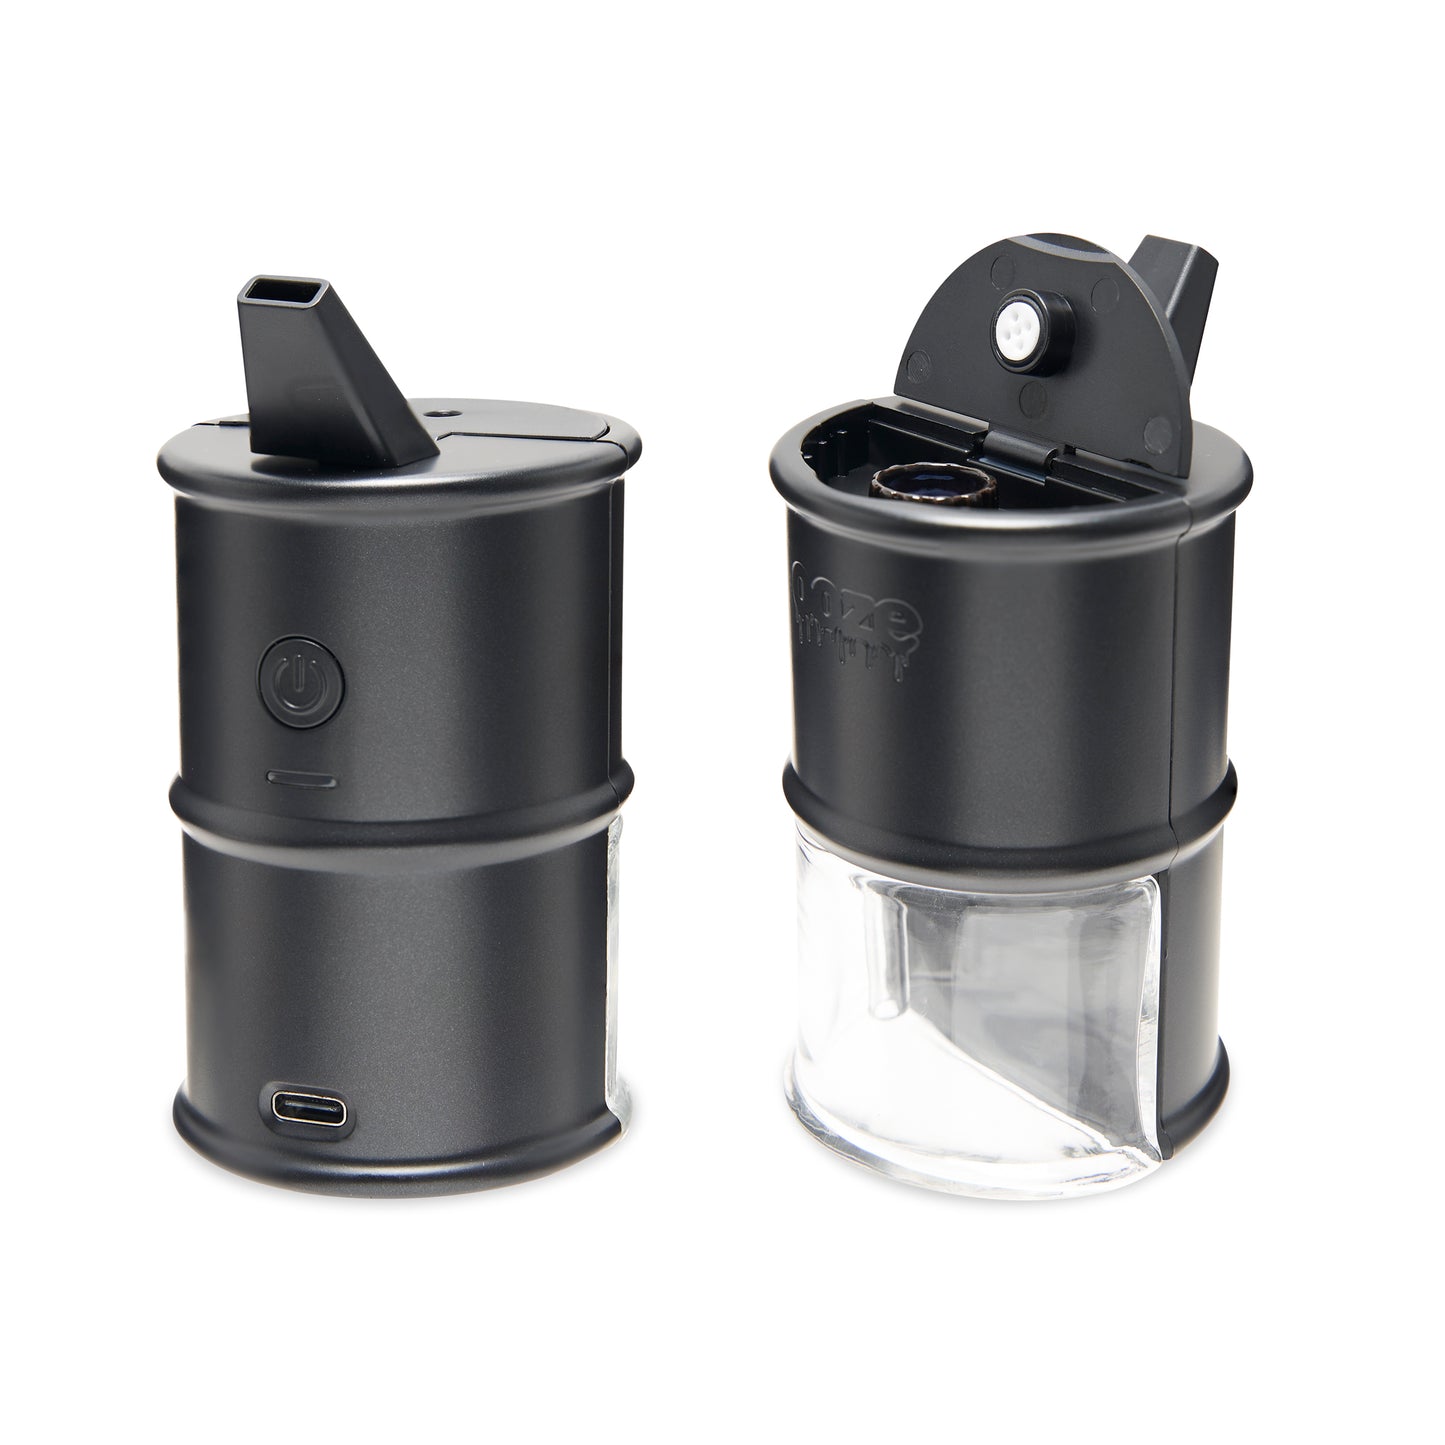 Two of the Panther Black Ooze Electro Barrel E-Rigs are shown side by side to show the front and back. On the left is the back where the button is shown and the front is shown on the right with the water chamber visible and lid open to show the Onyx Atomizer.